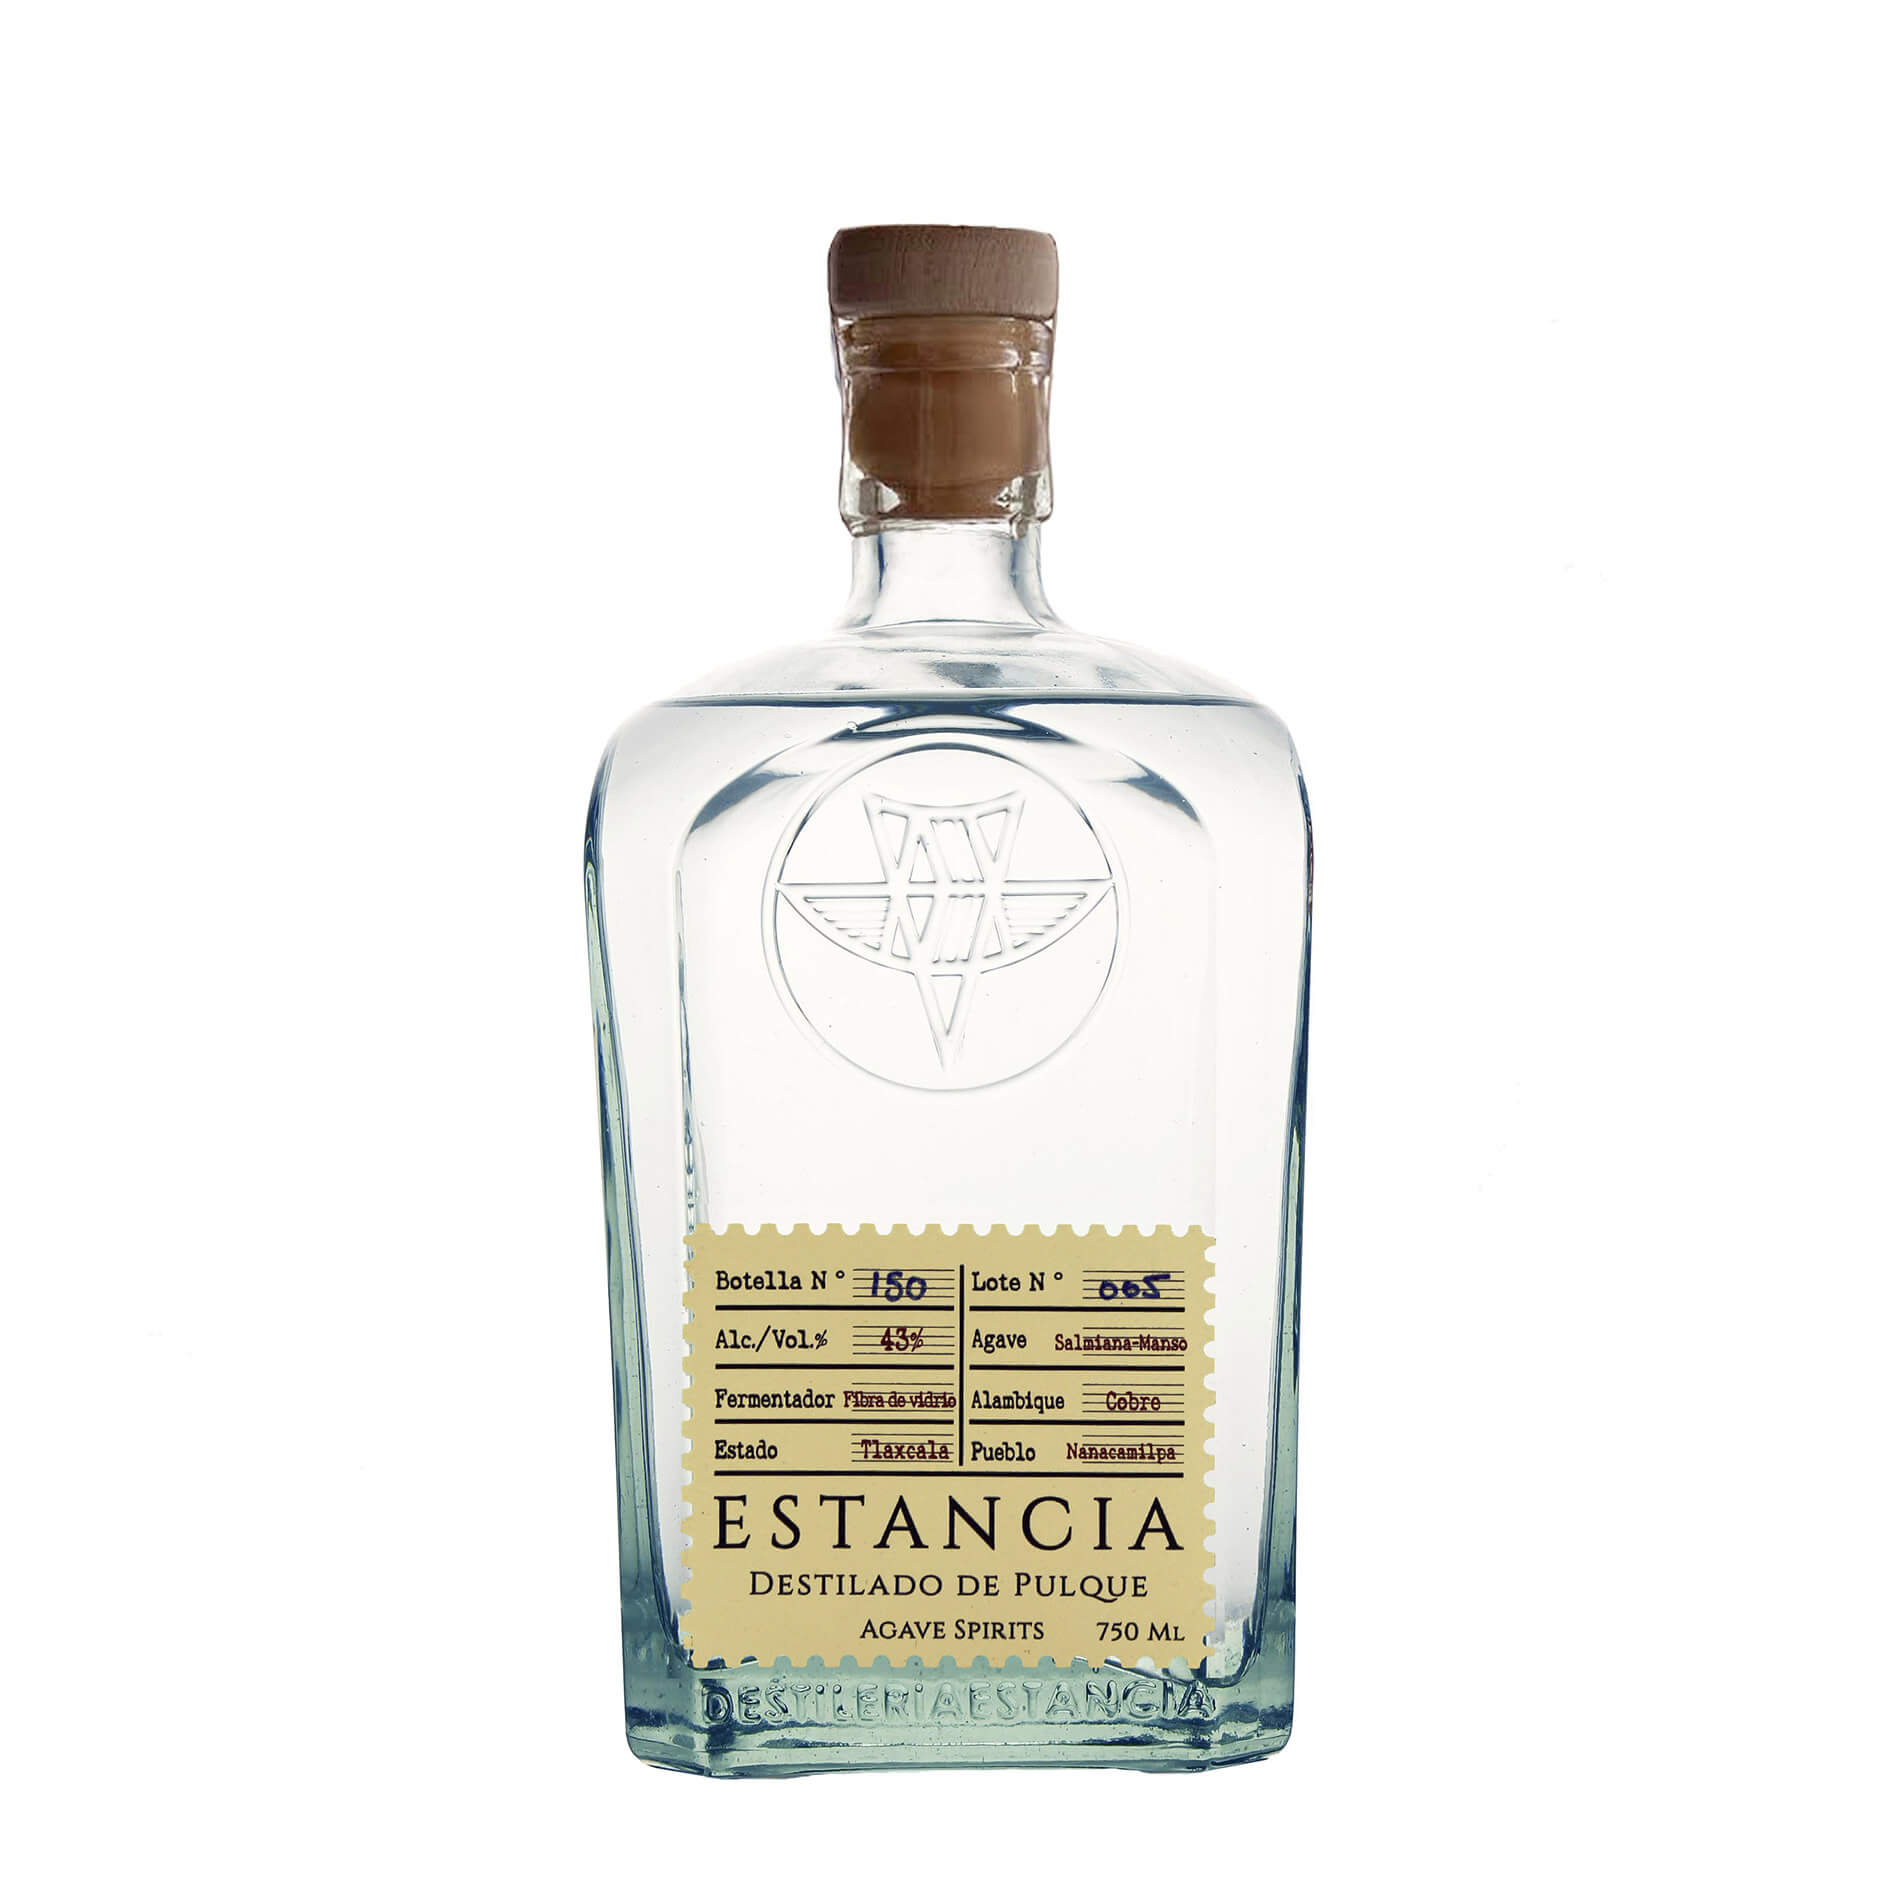 This Australian owned Raicilla Distillery bares all its flavour and aroma thanks to the environment provided by luscious volcanic mountains of the Sierra Madre Occidental Jalisco, Mexico.

Further pronounced by the Australian born owner and master Distiller Rio Chenery.